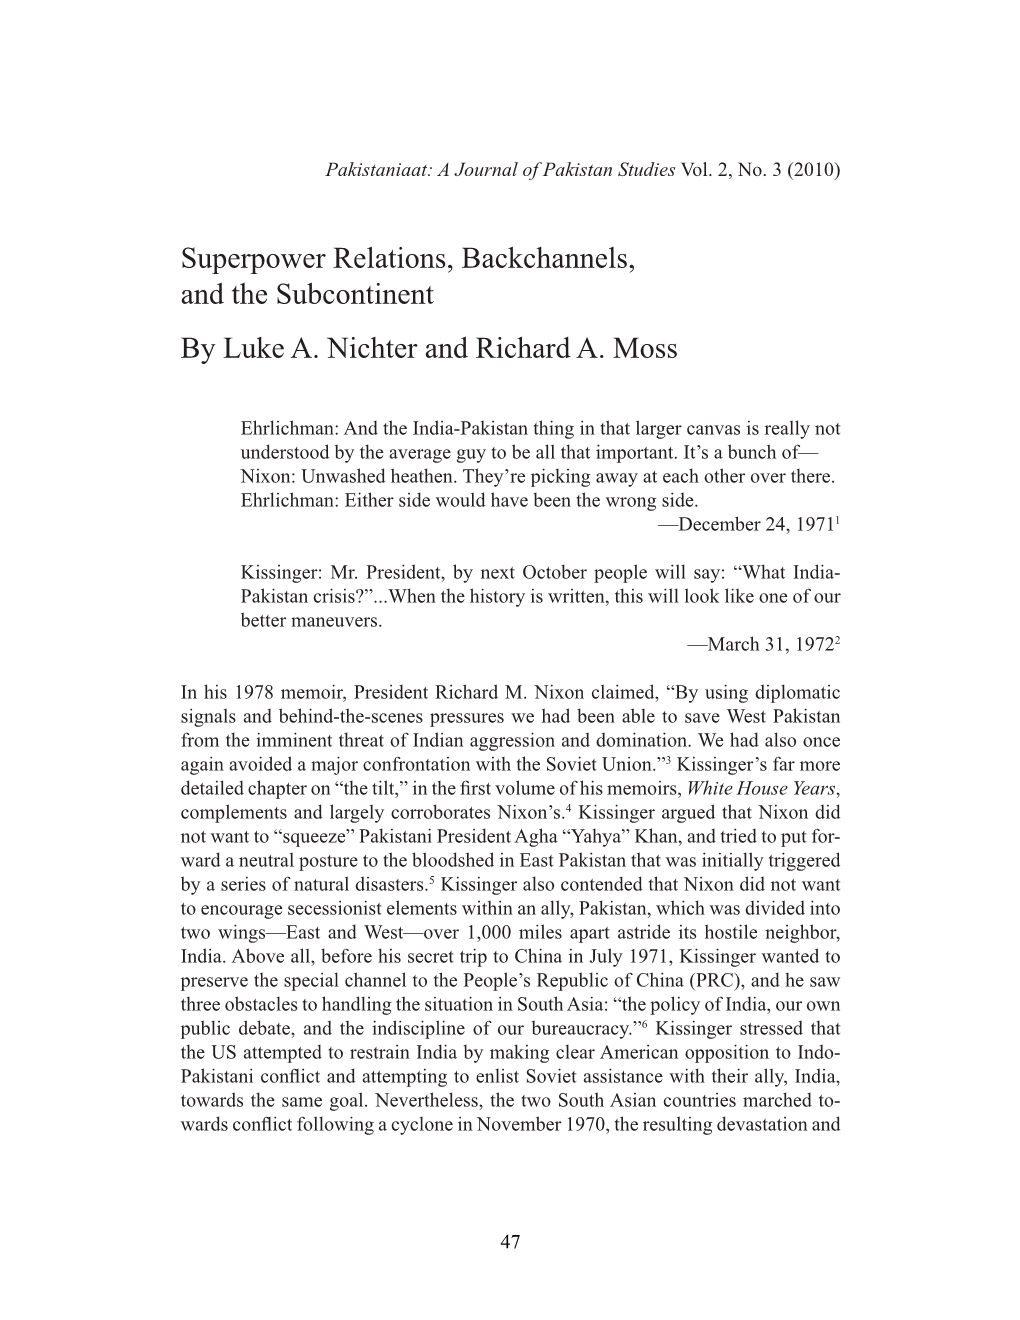 Superpower Relations, Backchannels, and the Subcontinent by Luke A